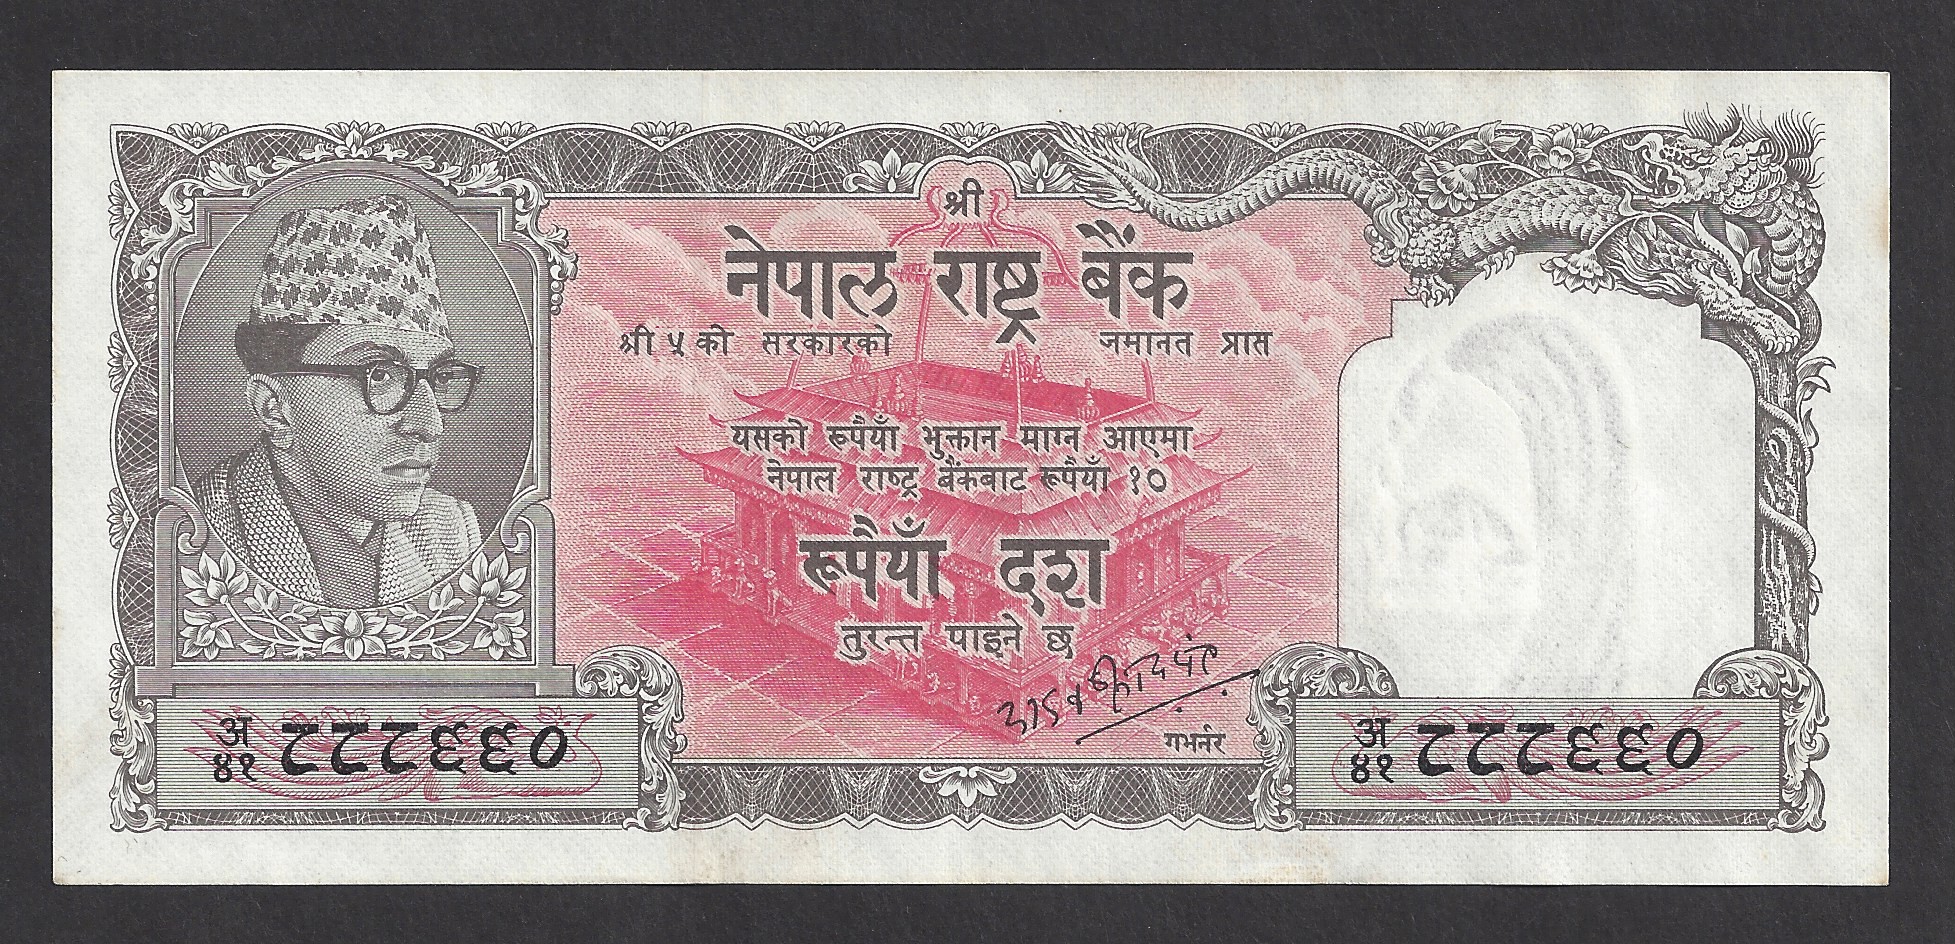 Nepal Currency
